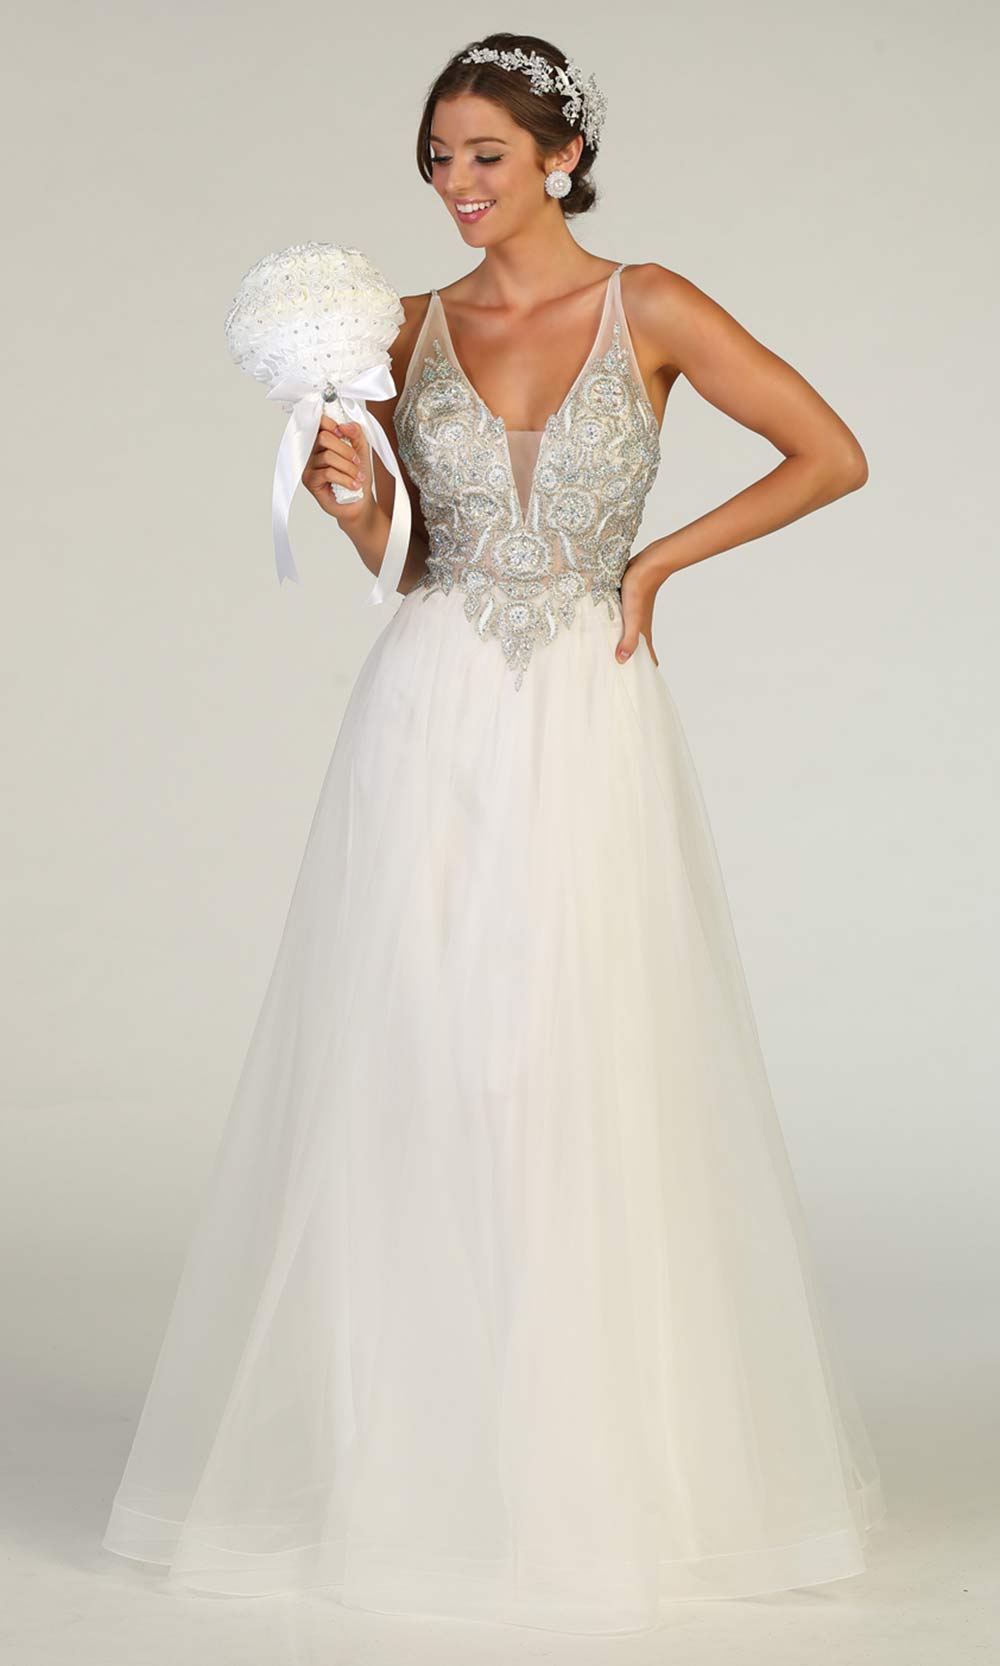 Mayqueen MQ1737-long white evening dresses w/ v neck top, flowy skirt. This long white formal dress is perfect for wedding bridal dress, white prom dress, simple wedding,second wedding, destination wedding dress, second wedding dress.Plus sizes avail.jpg